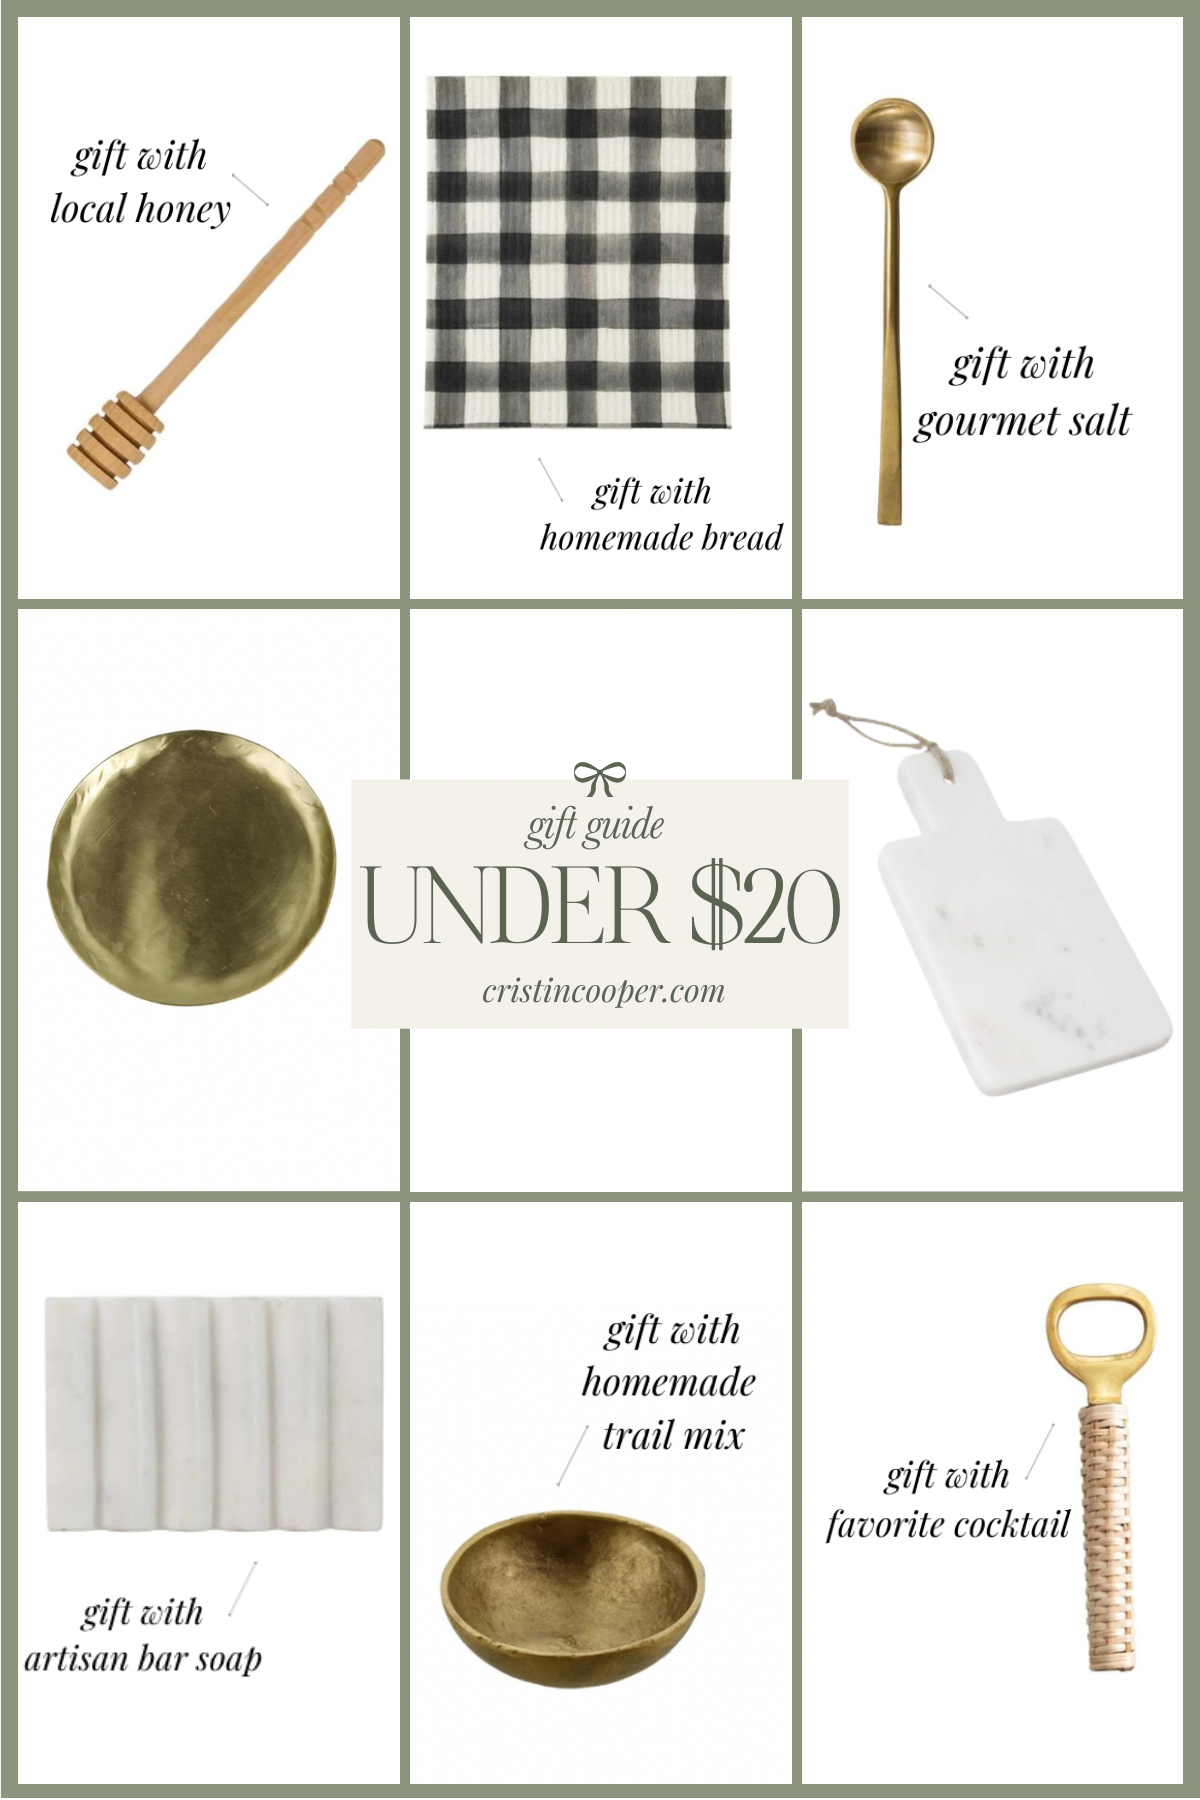 30 Gifts Under $20 for Friends - Cristin Cooper